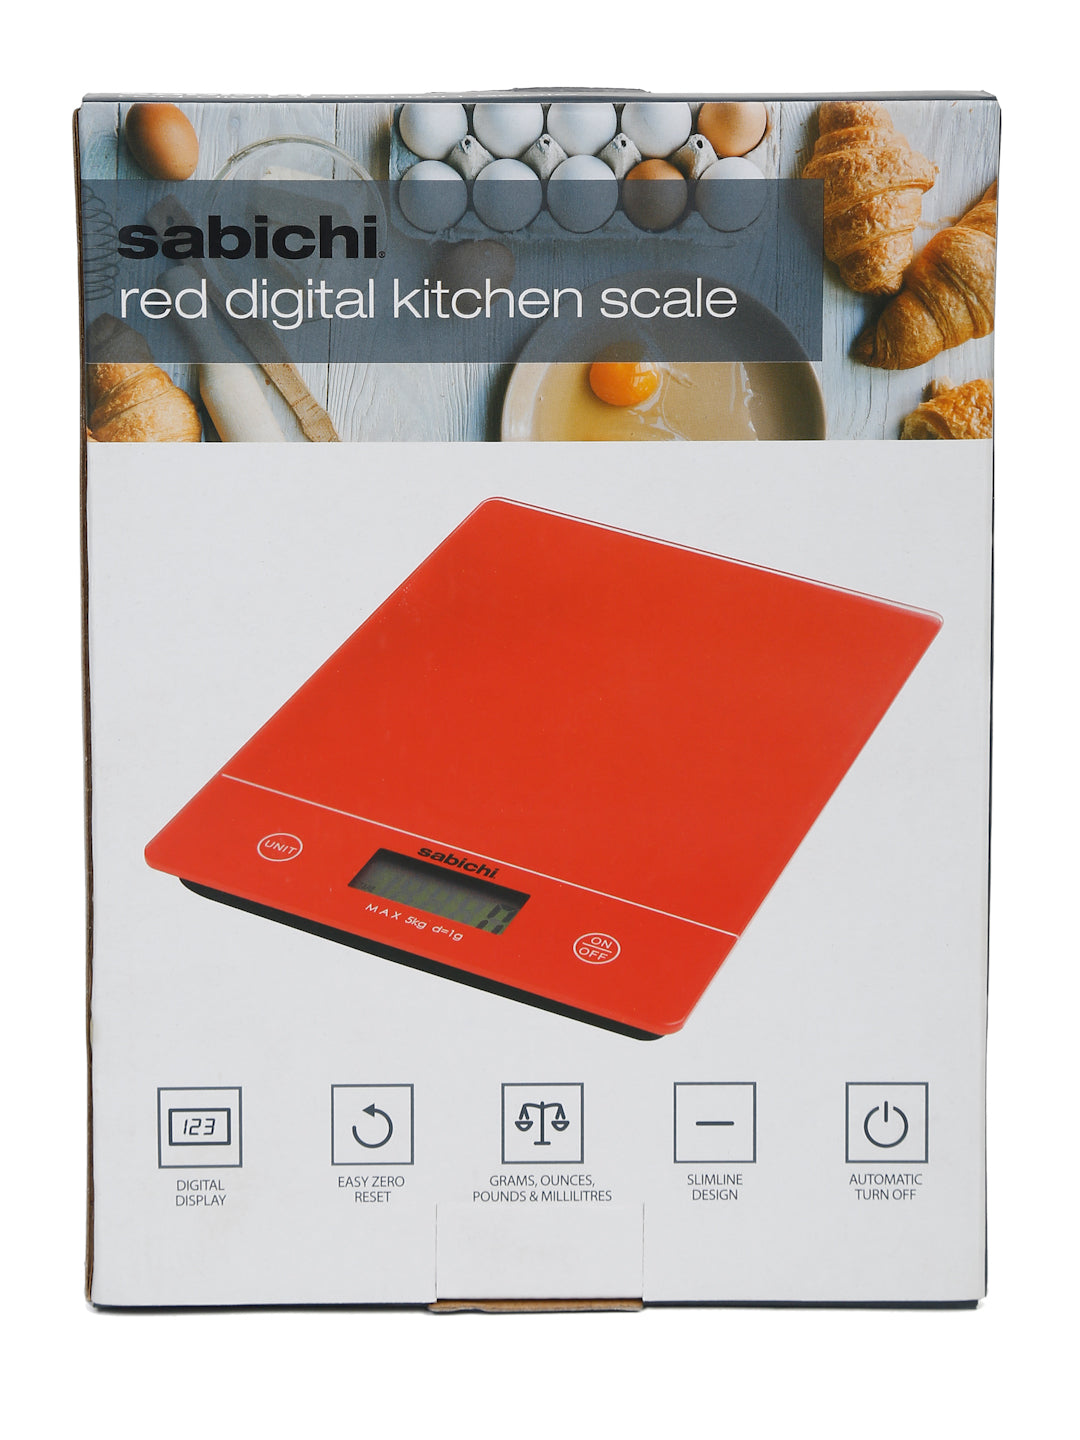 Sabichi Stainless Steel Digital Kitchen Weighing Scale, Multi-purpose Electronic Food Weight machine for Diet, Health and Fitness, 5 kg Capacity, LCD Display for Measuring fruits & Vegetables (Red) - pengessentials